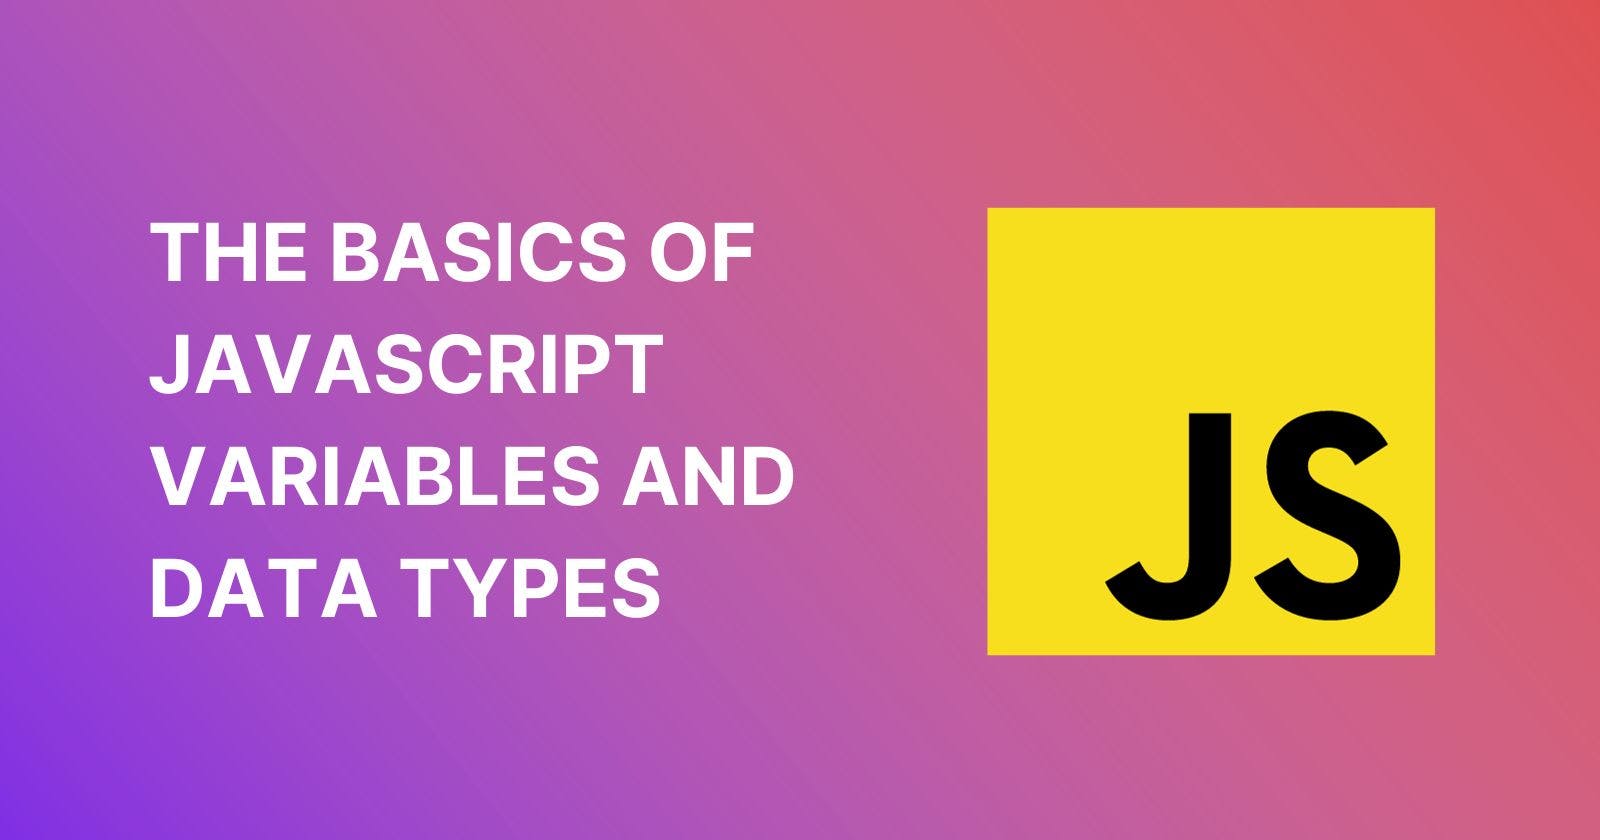 Understanding the Basics of JavaScript Variables and Data Types for Beginners